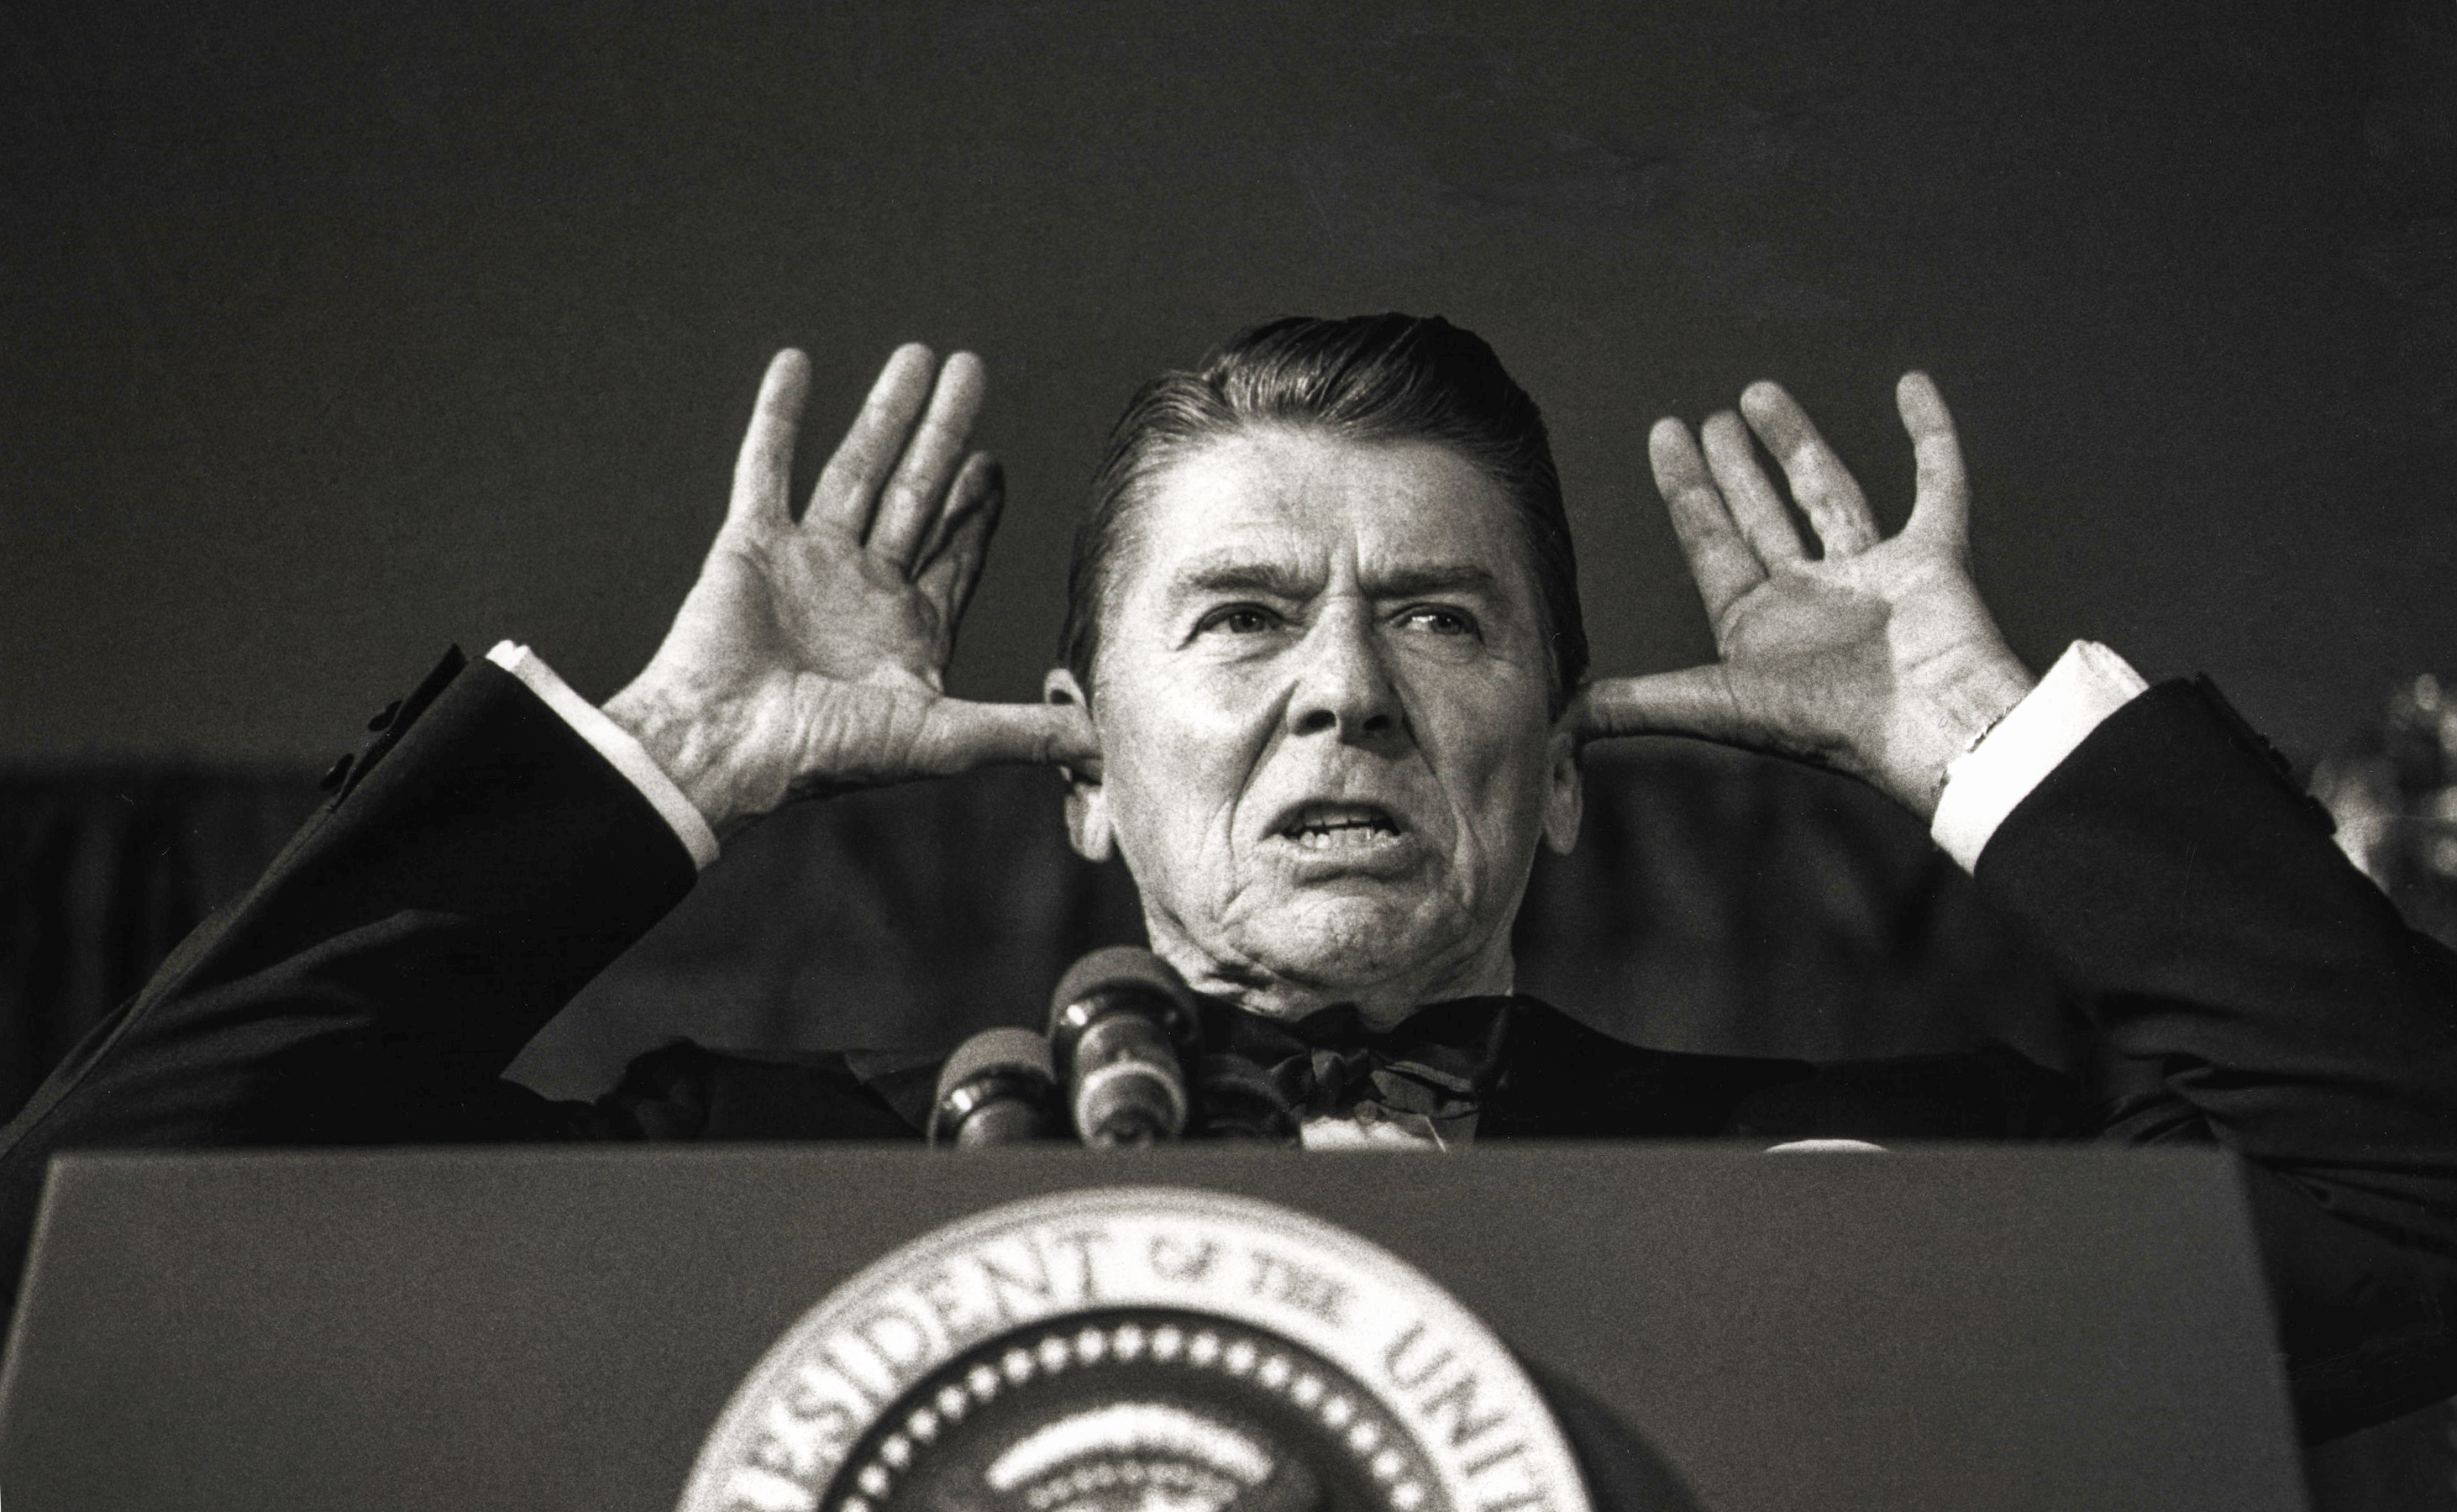 Ronald Reagan brought the anti-government creed back into style.